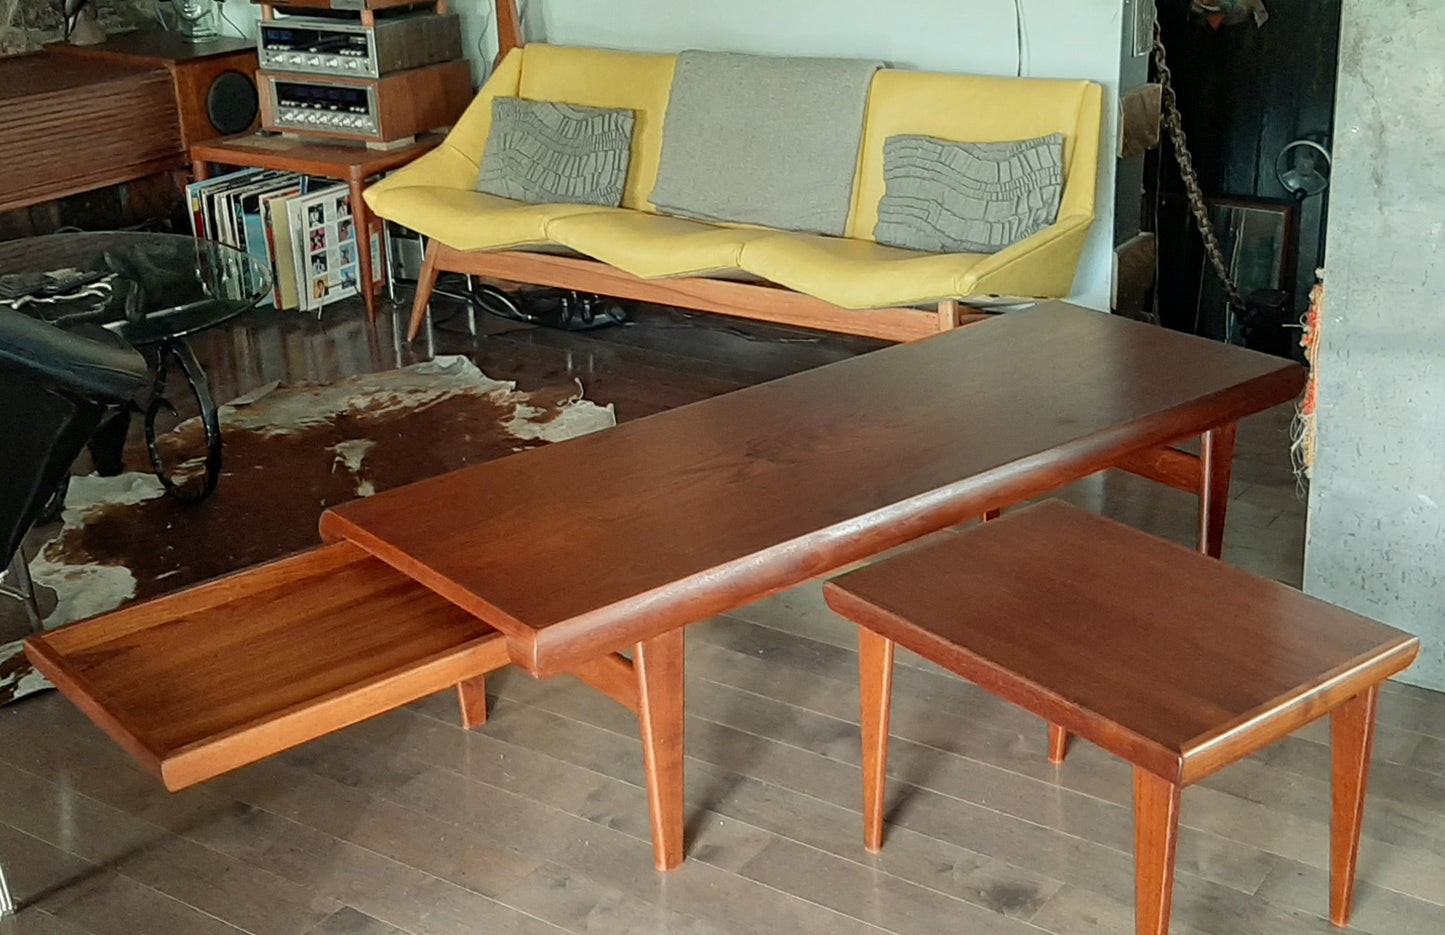 REFINISHED Danish MCM Teak Coffee Table 3 in 1 by Johannes Andersen , PERFECT